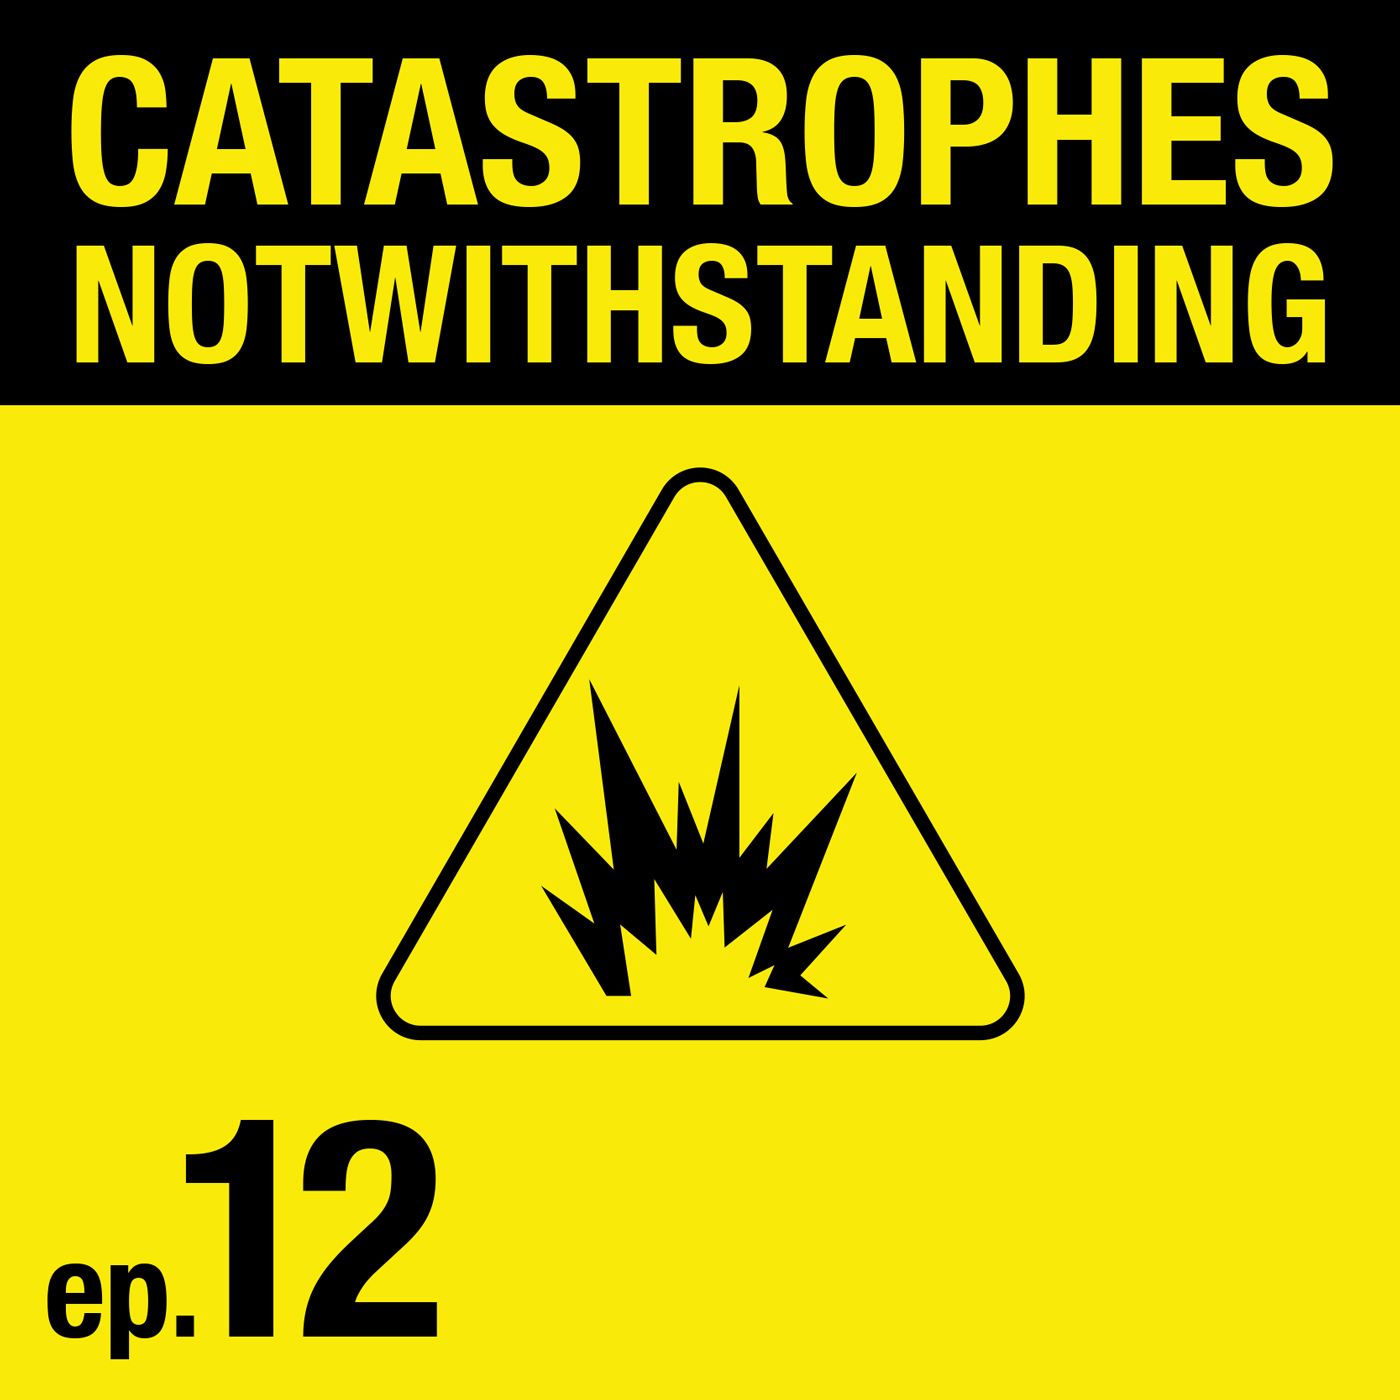 Cover Image of Catastrophes Notwithstanding Episode 12